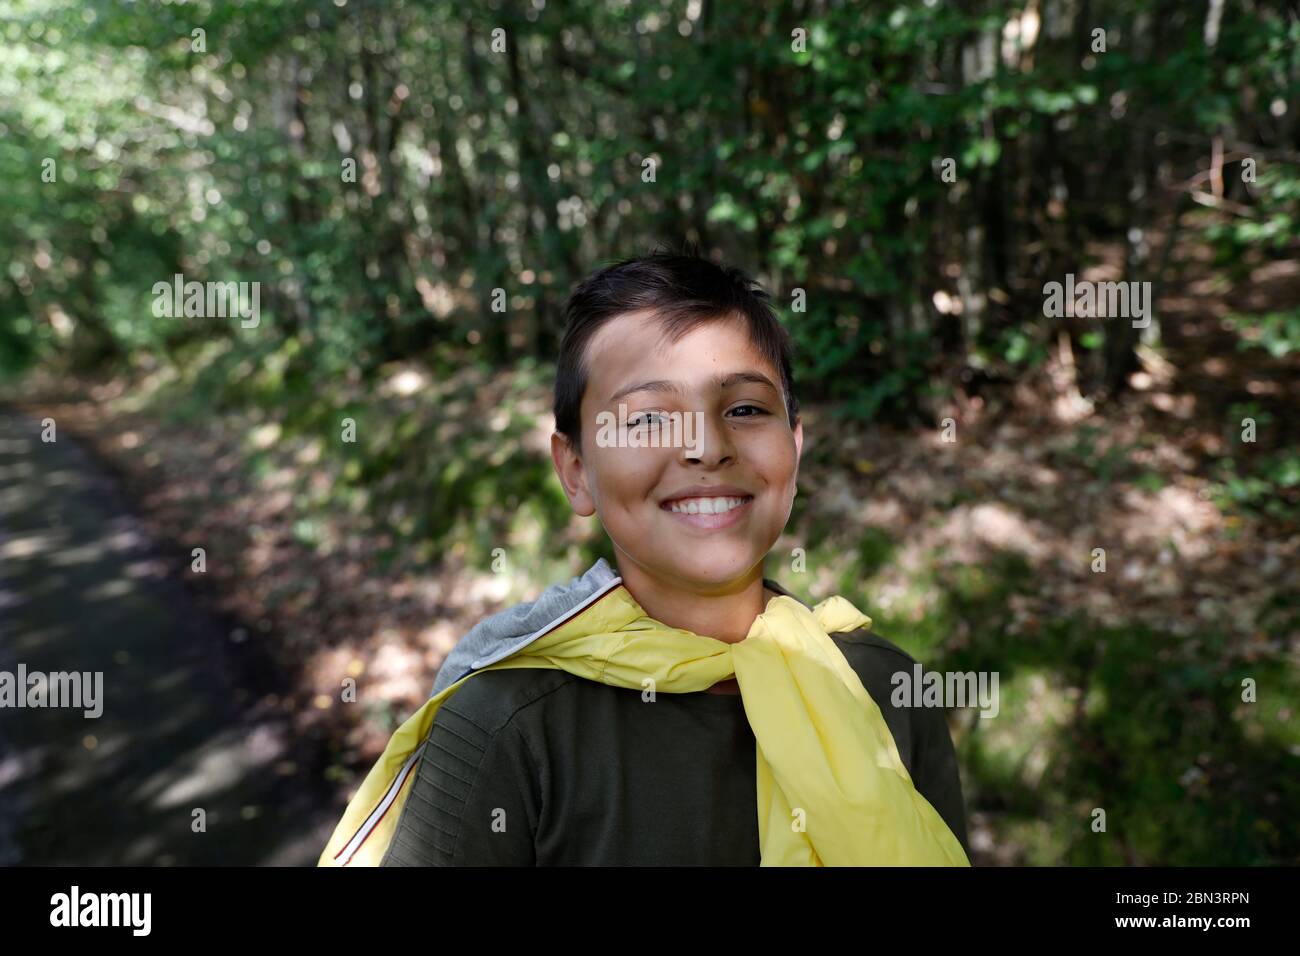 14-year-old boy walking in a forest in Eure, France. Stock Photo